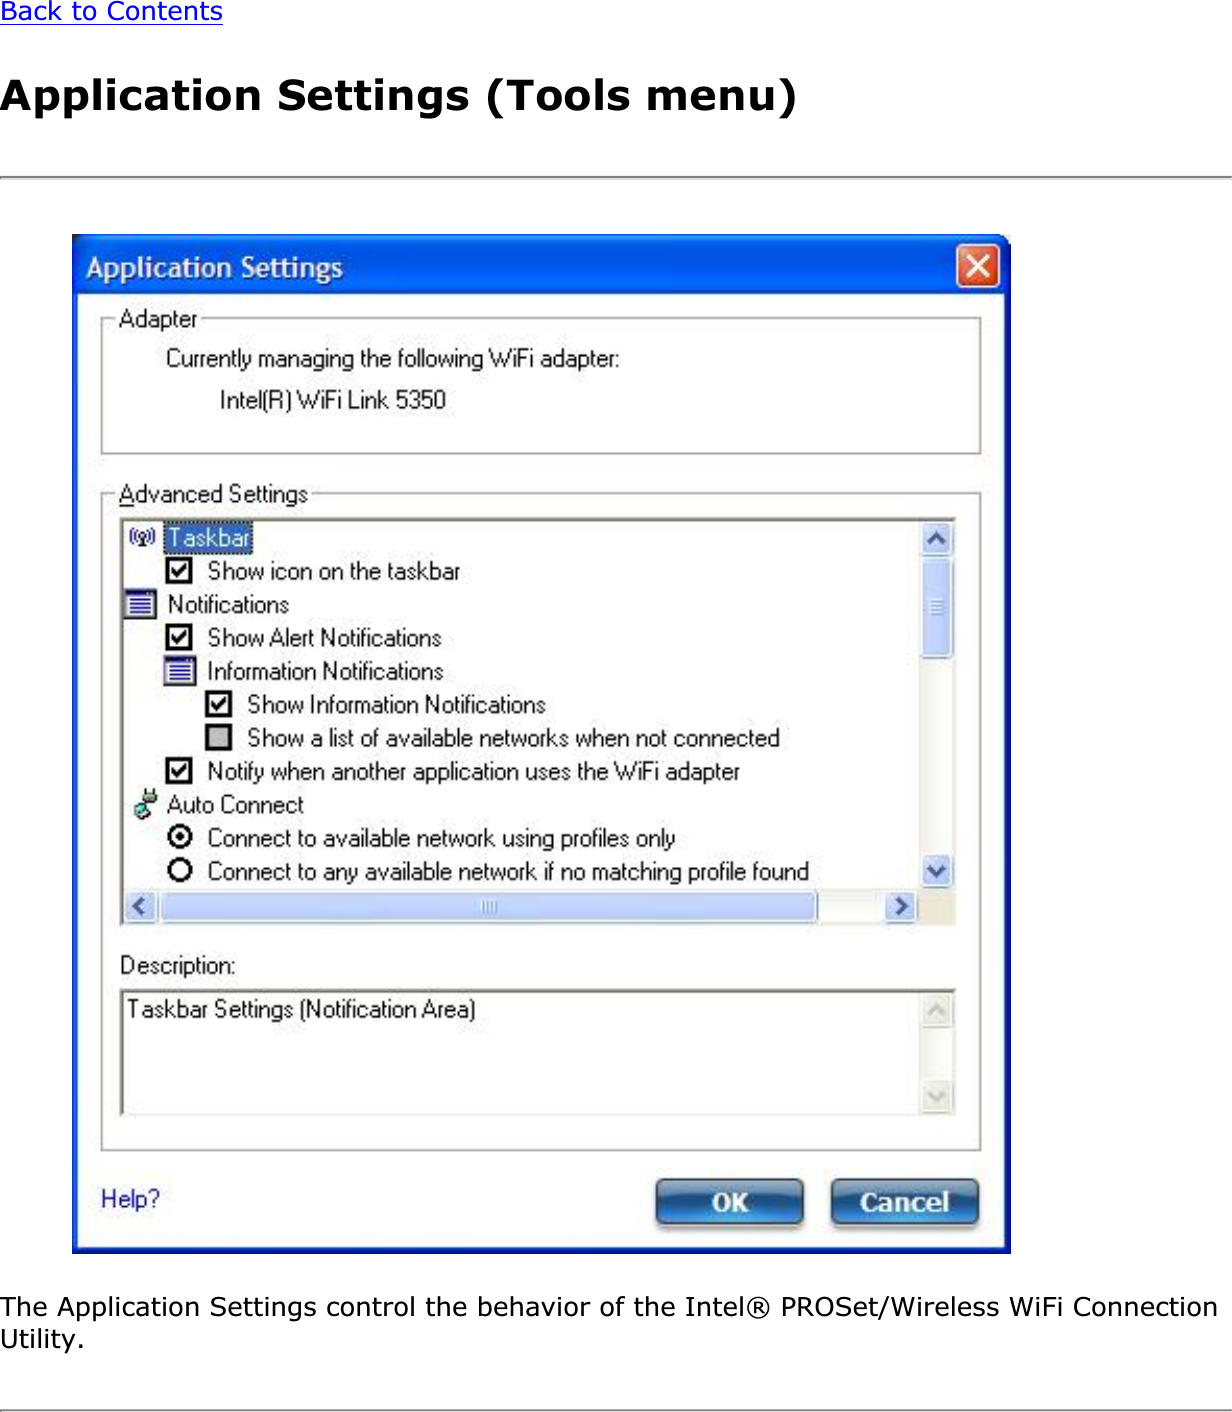 Back to ContentsApplication Settings (Tools menu)The Application Settings control the behavior of the Intel® PROSet/Wireless WiFi Connection Utility.